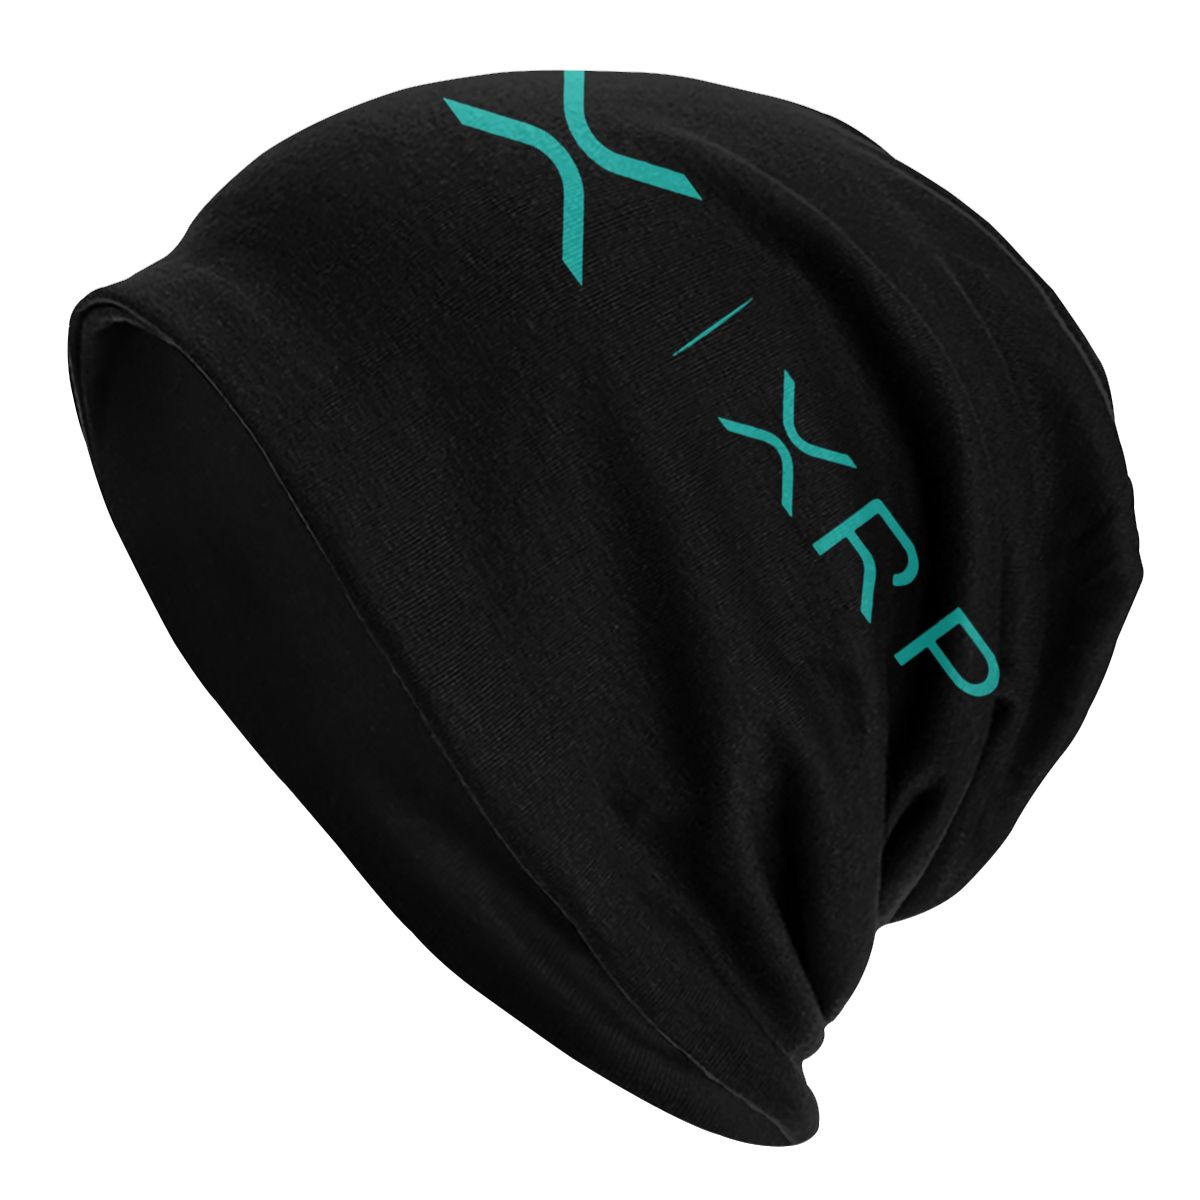 Xrp Ripple knitted hat